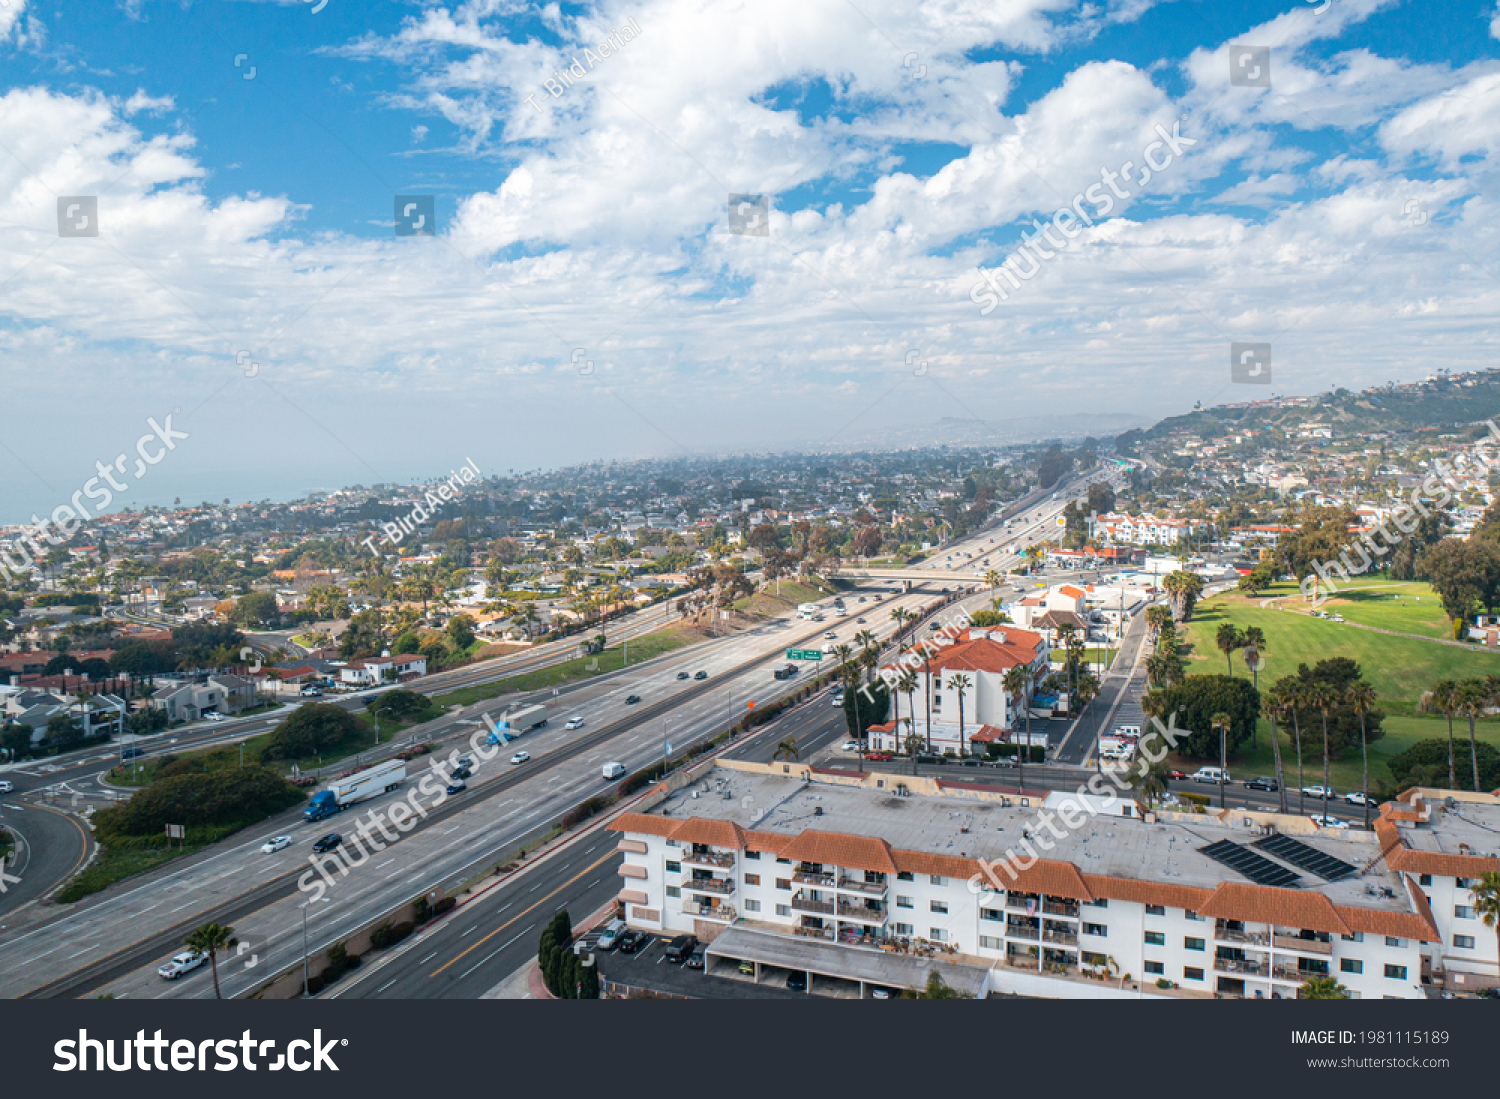 High Altitude Drone Shot of North San Clemente, Looking Over the I-5 Freeway #1981115189